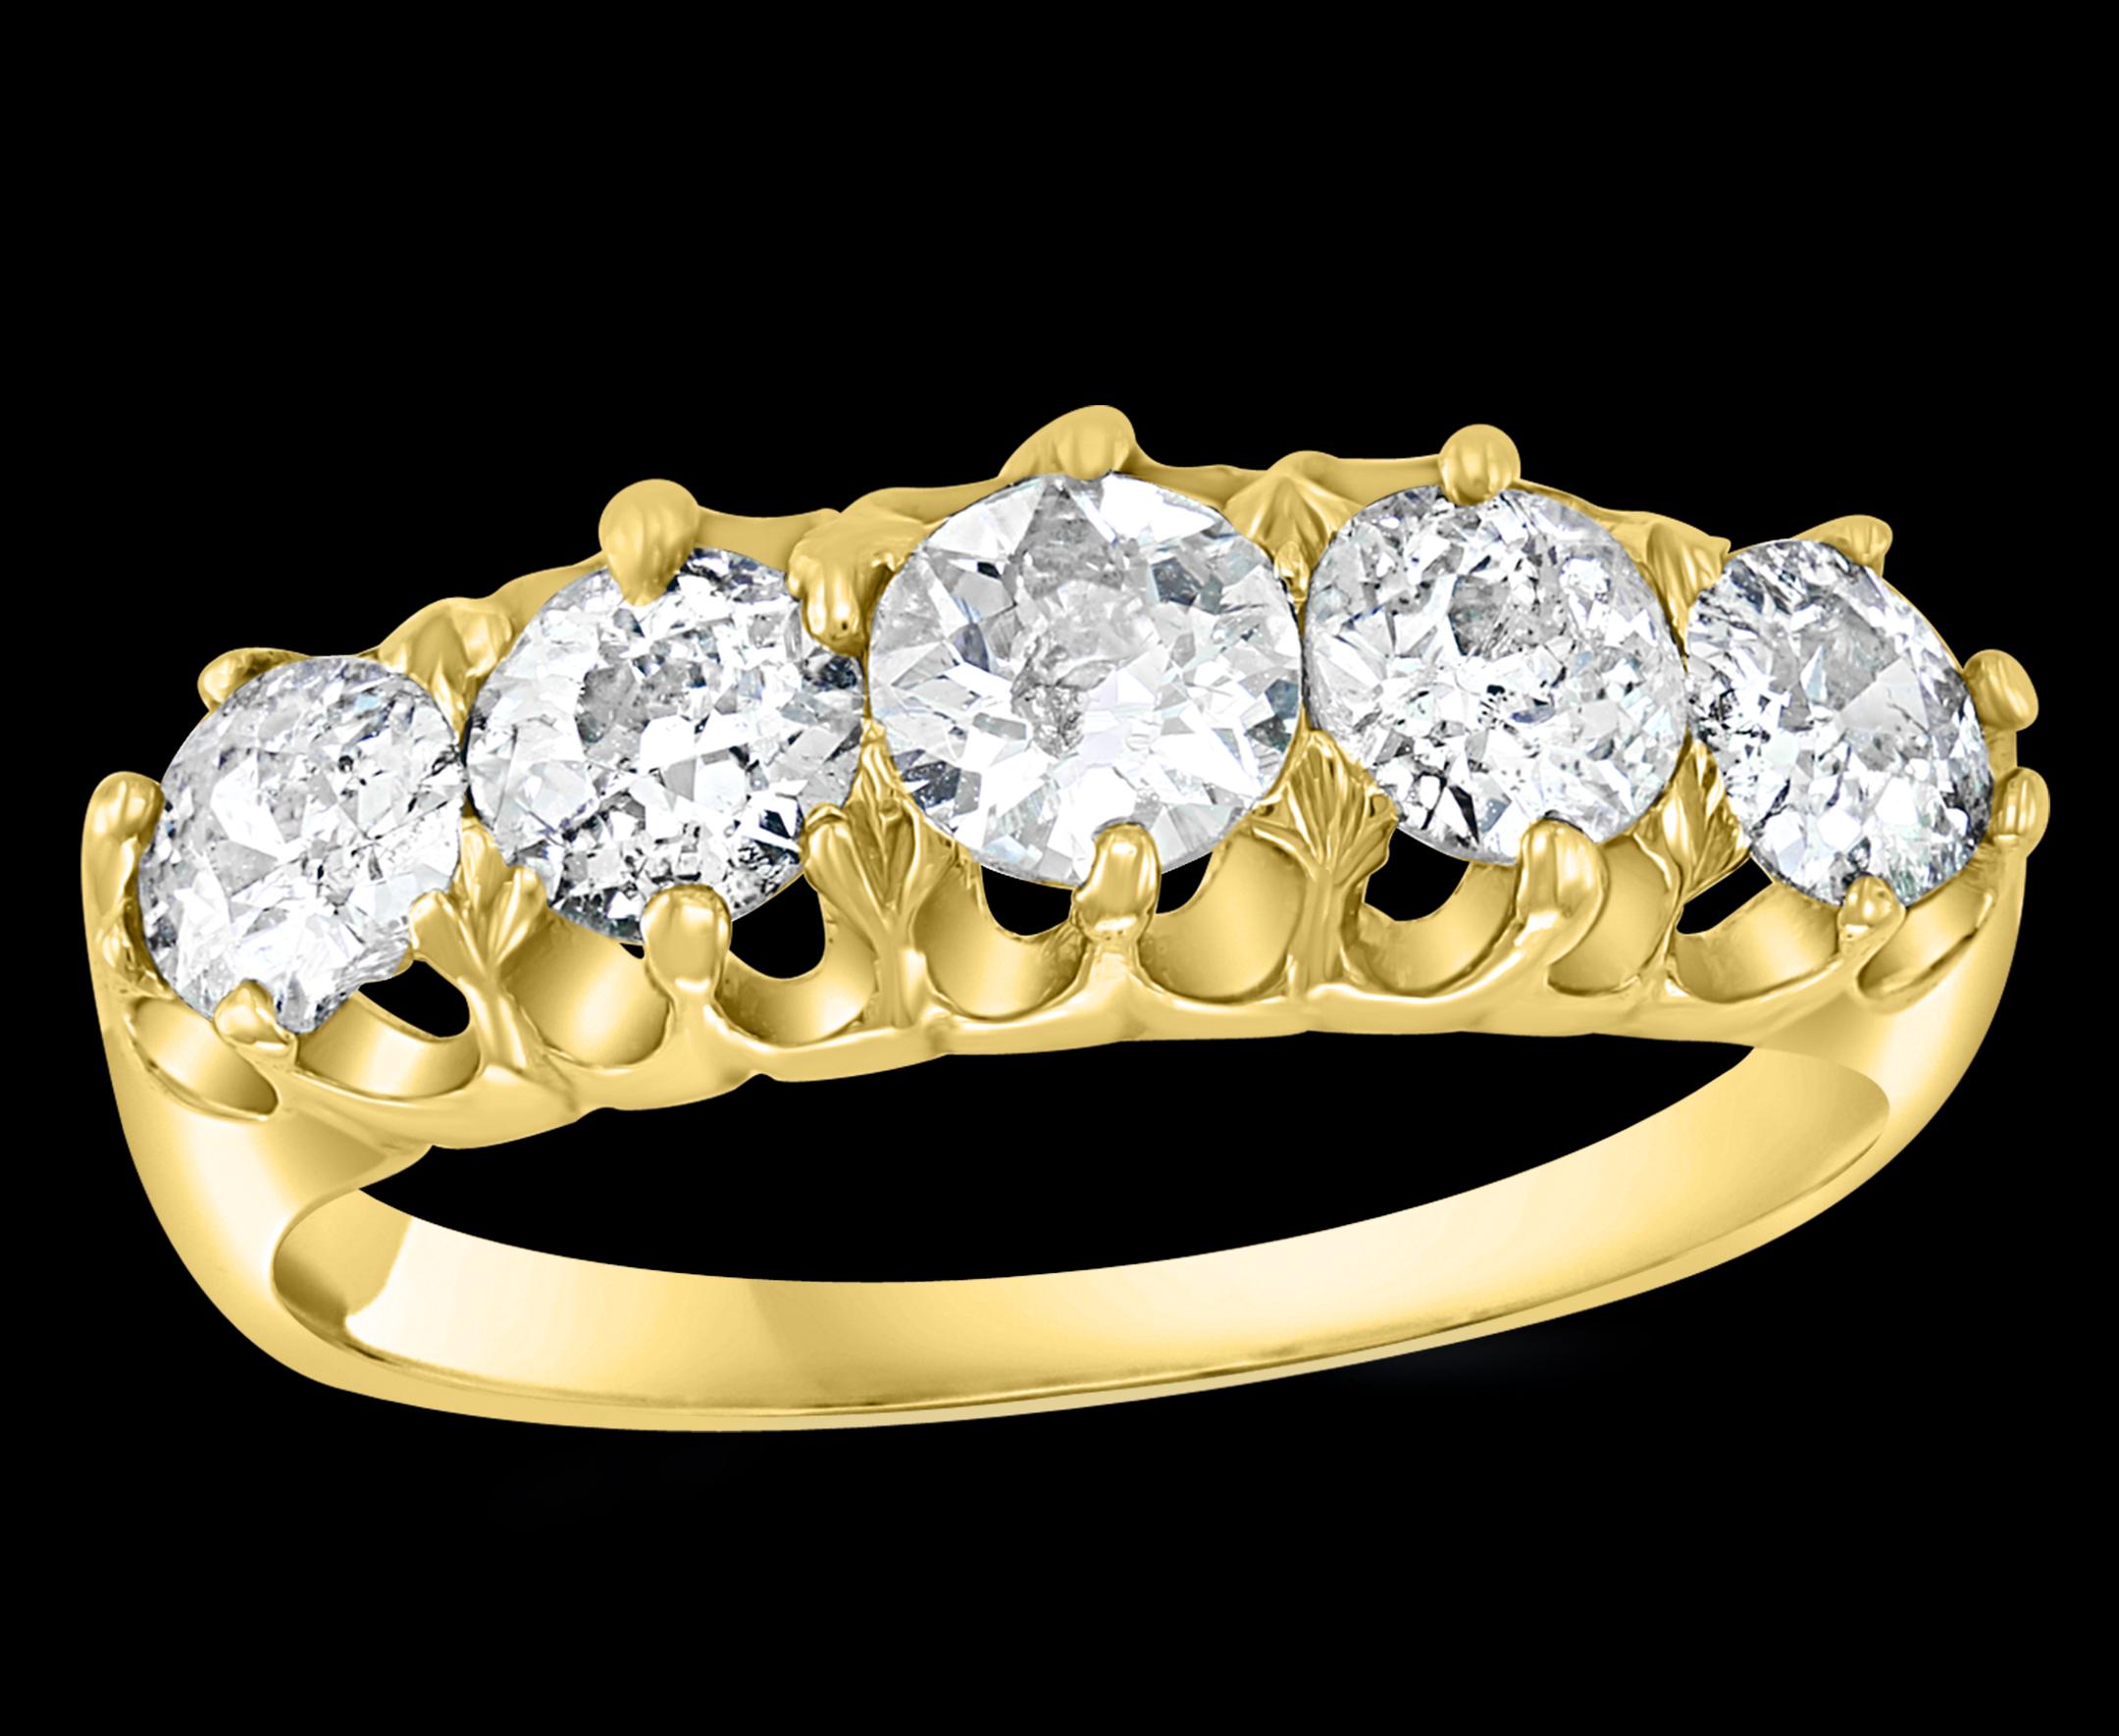 5 Diamonds , Unisex 1-Row Diamond  Band Ring in 14 Karat  Yellow Gold Size 7
This is a Prong setting   ring  from our affordable  premium wedding collection.
 5  round diamonds Eye Clean quality are set in  a row in 14 karat yellow gold .
Ring size